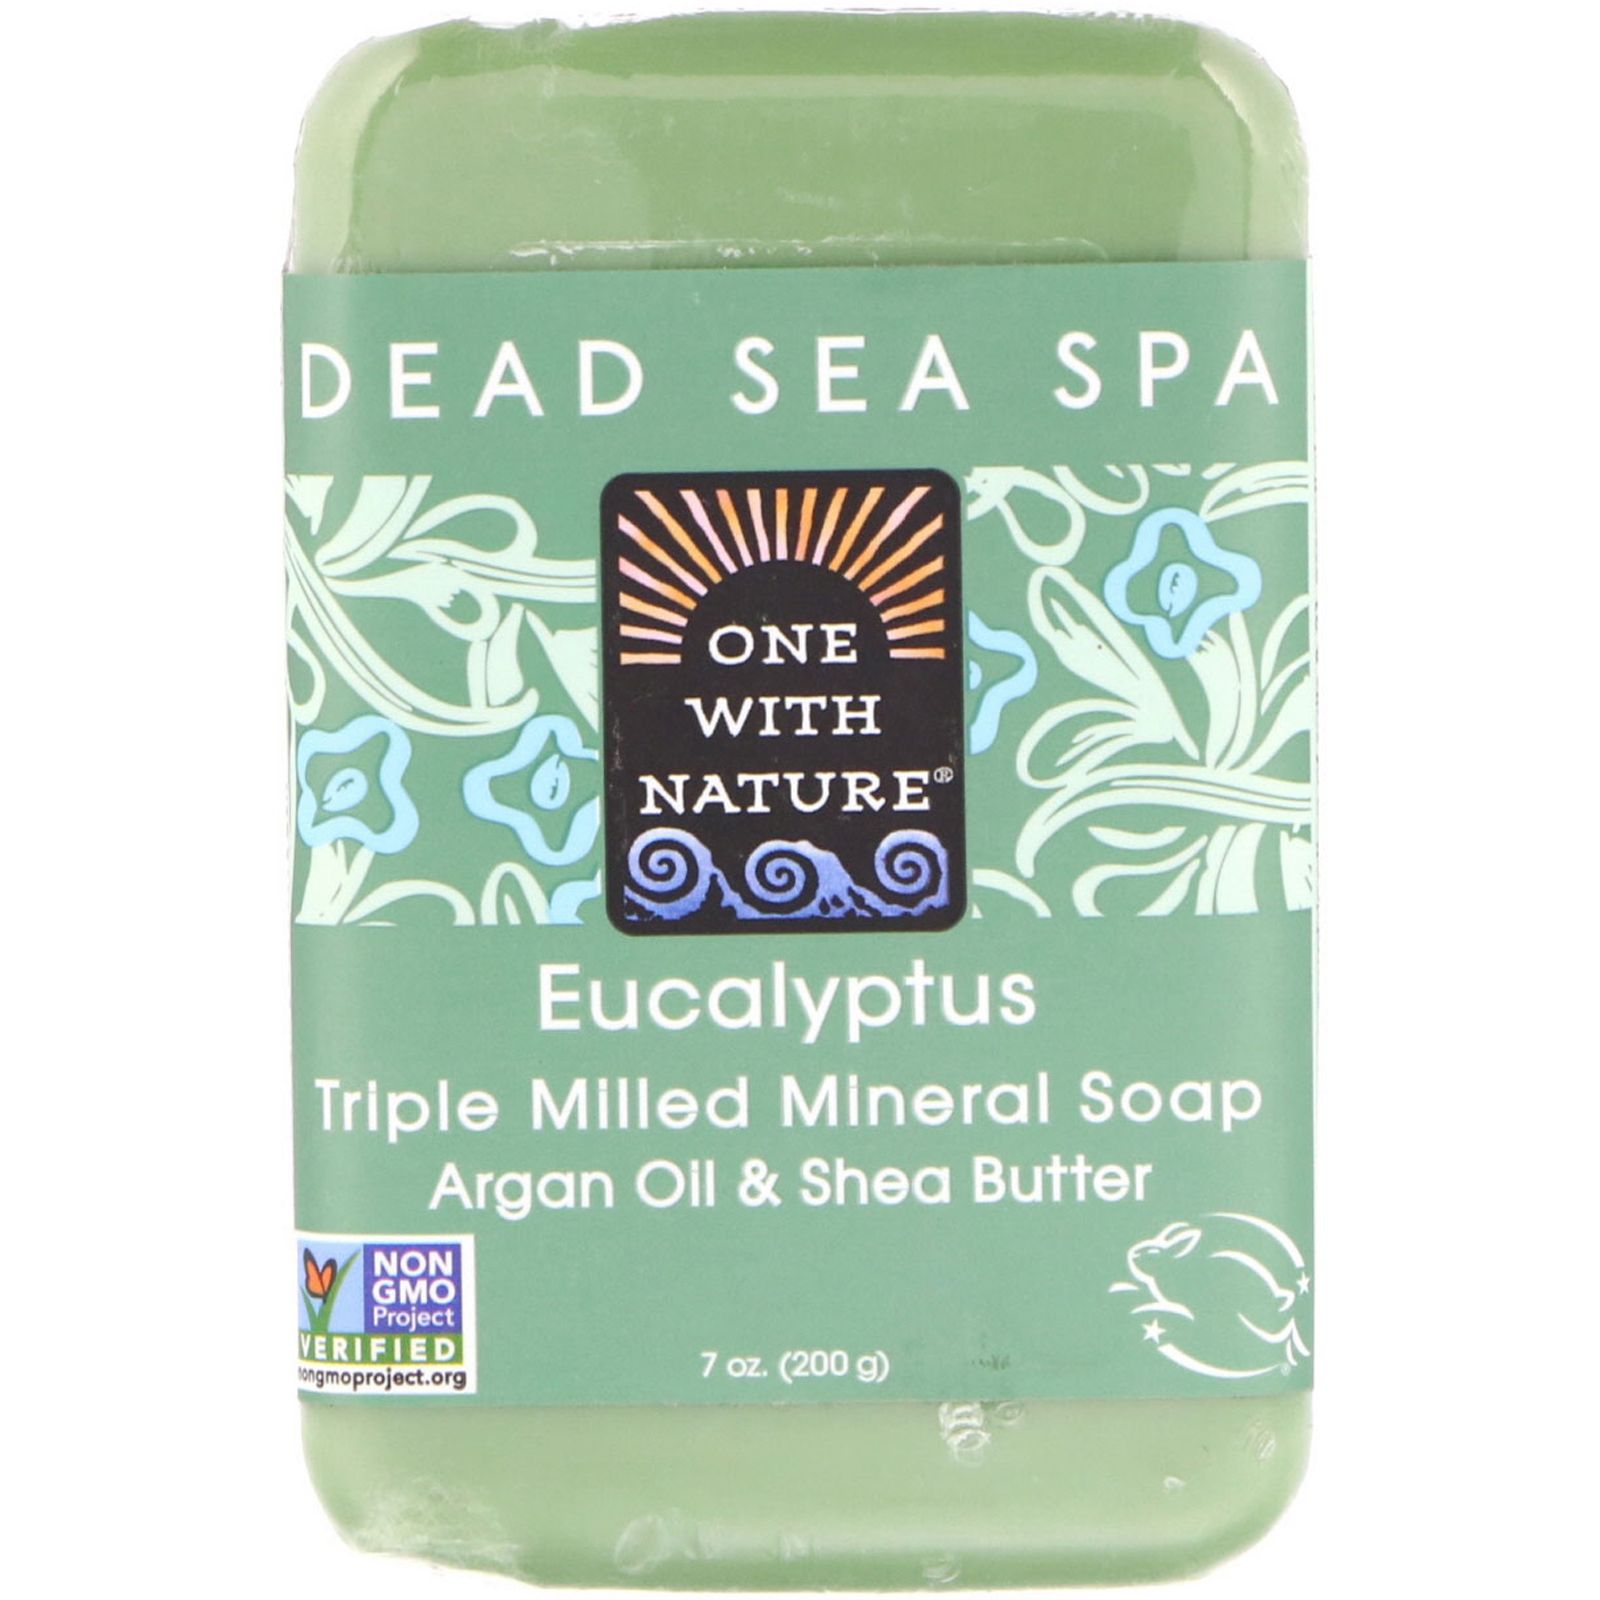 One with Nature Triple Milled Mineral Soap Bar Eucalyptus 7 oz (200 g)